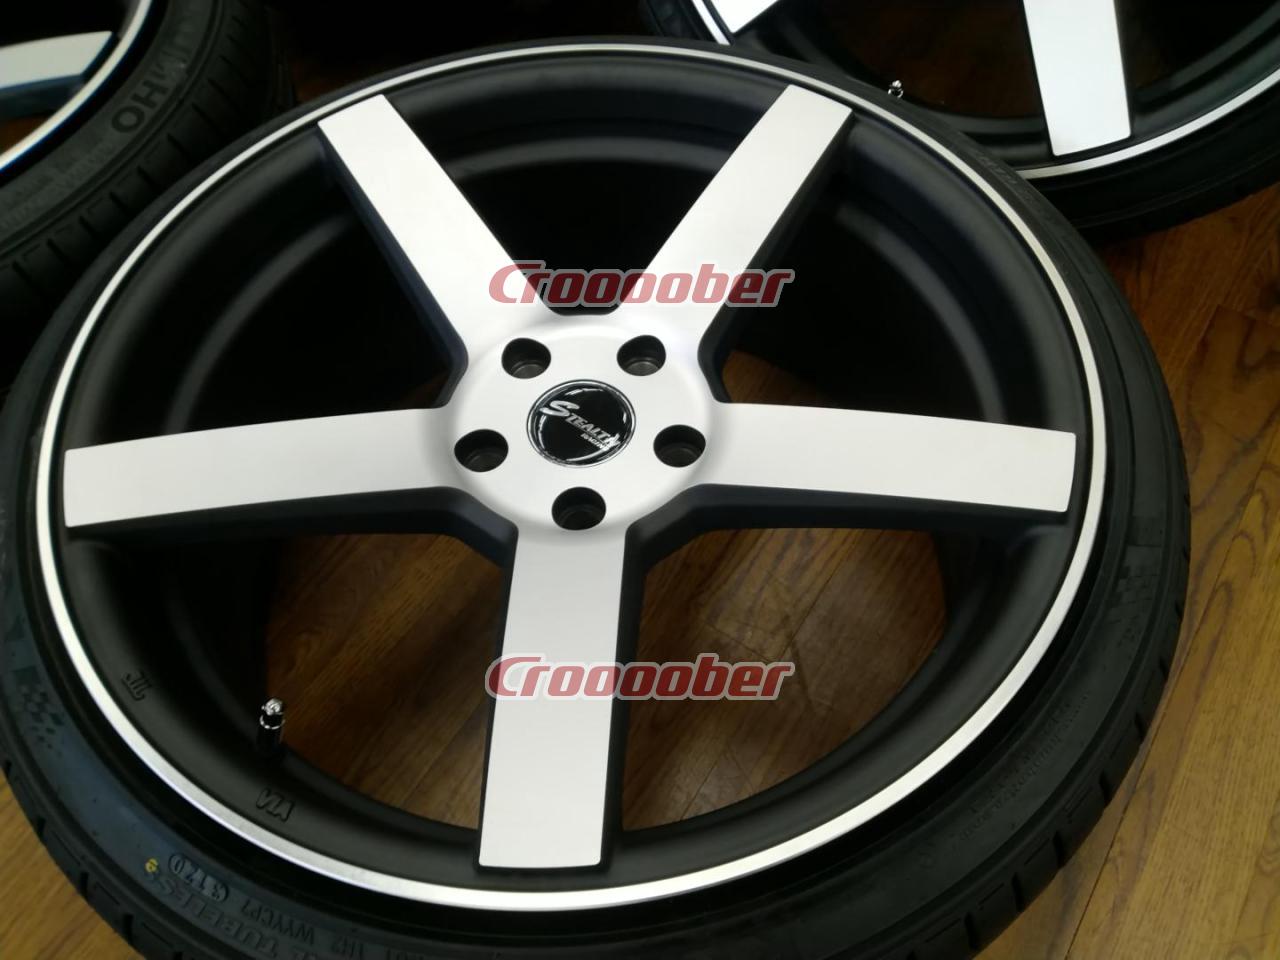 STEALTH RACING SPEC-02 + KUMHO ECSTA PS 71 - Front:8.0Jx19+35 Rear 